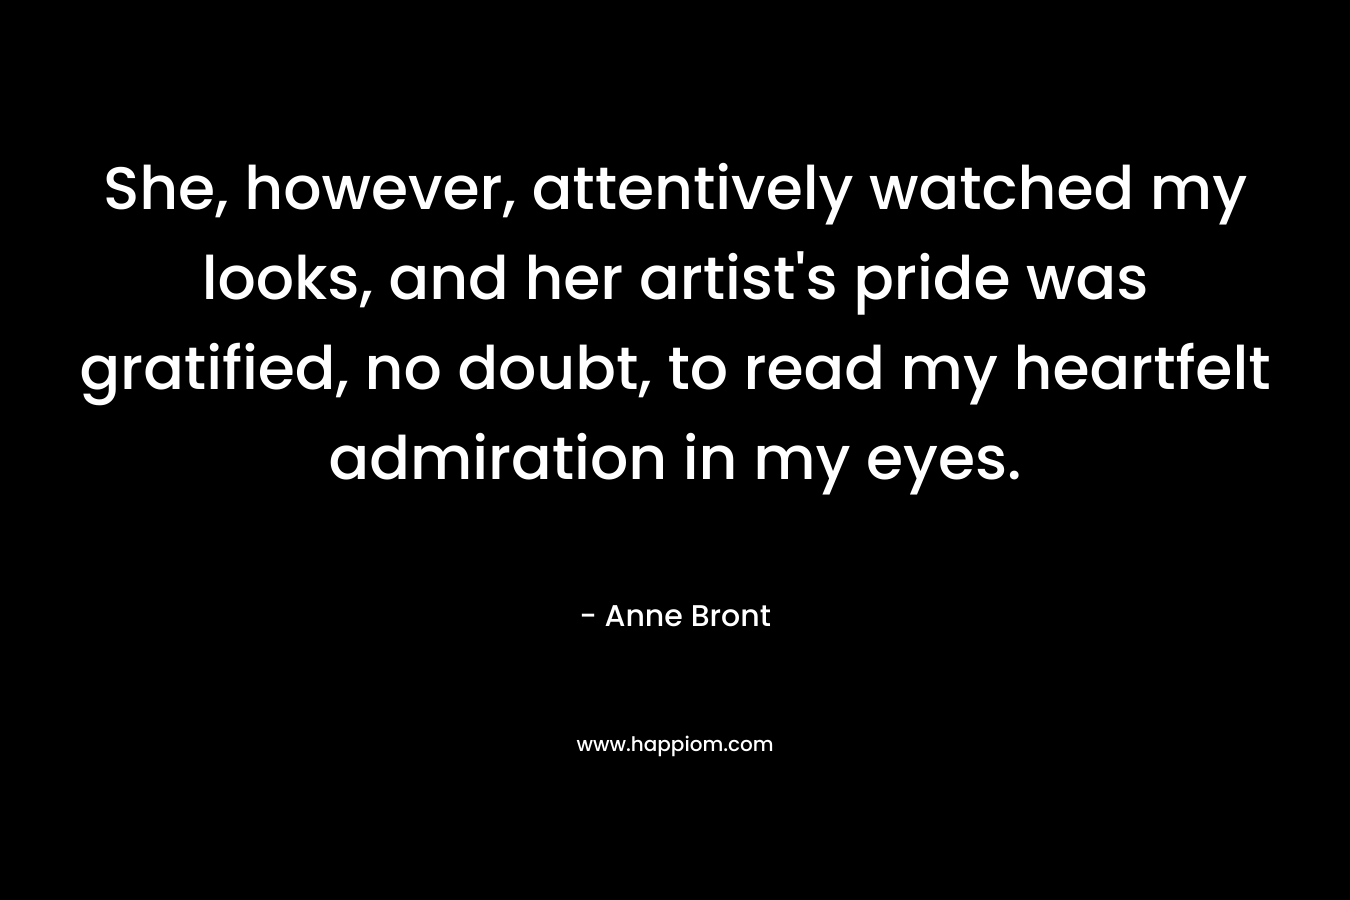 She, however, attentively watched my looks, and her artist’s pride was gratified, no doubt, to read my heartfelt admiration in my eyes. – Anne Bront